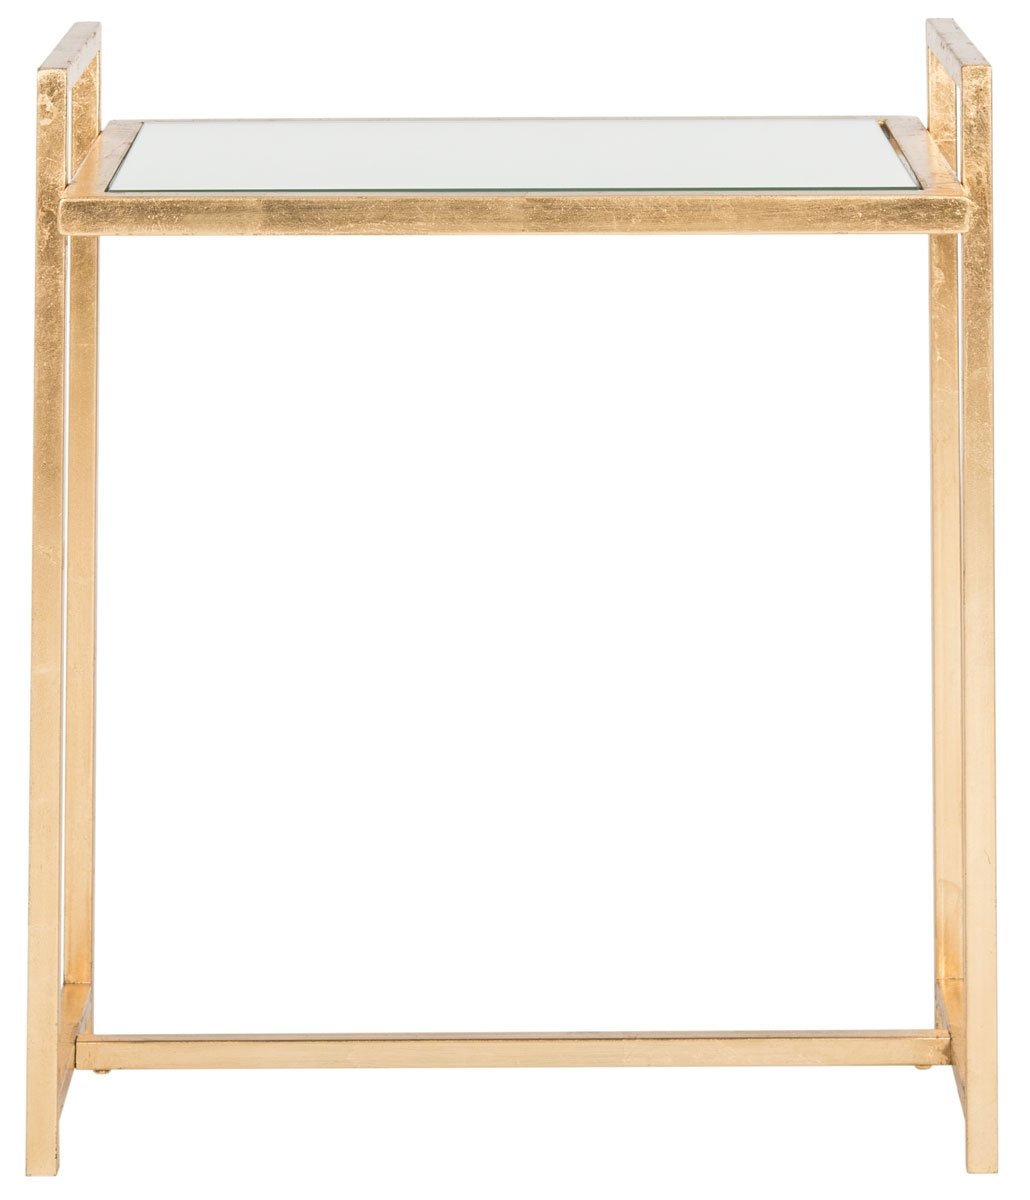 RENLY MIRROR TOP GOLD LEAF END TABLE - Image 2